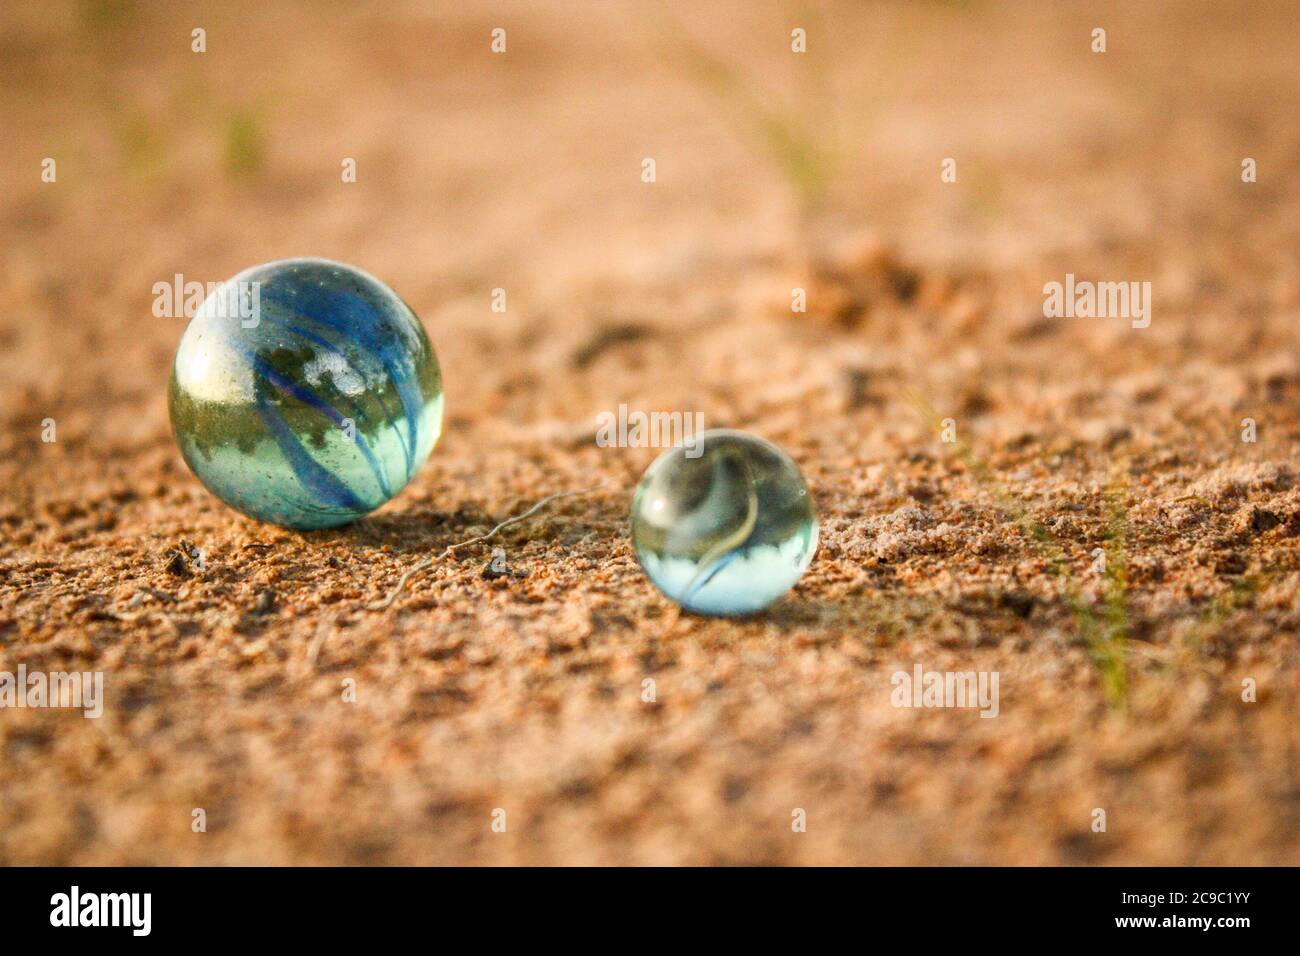 you can see two marbles on a sandy floor Stock Photo